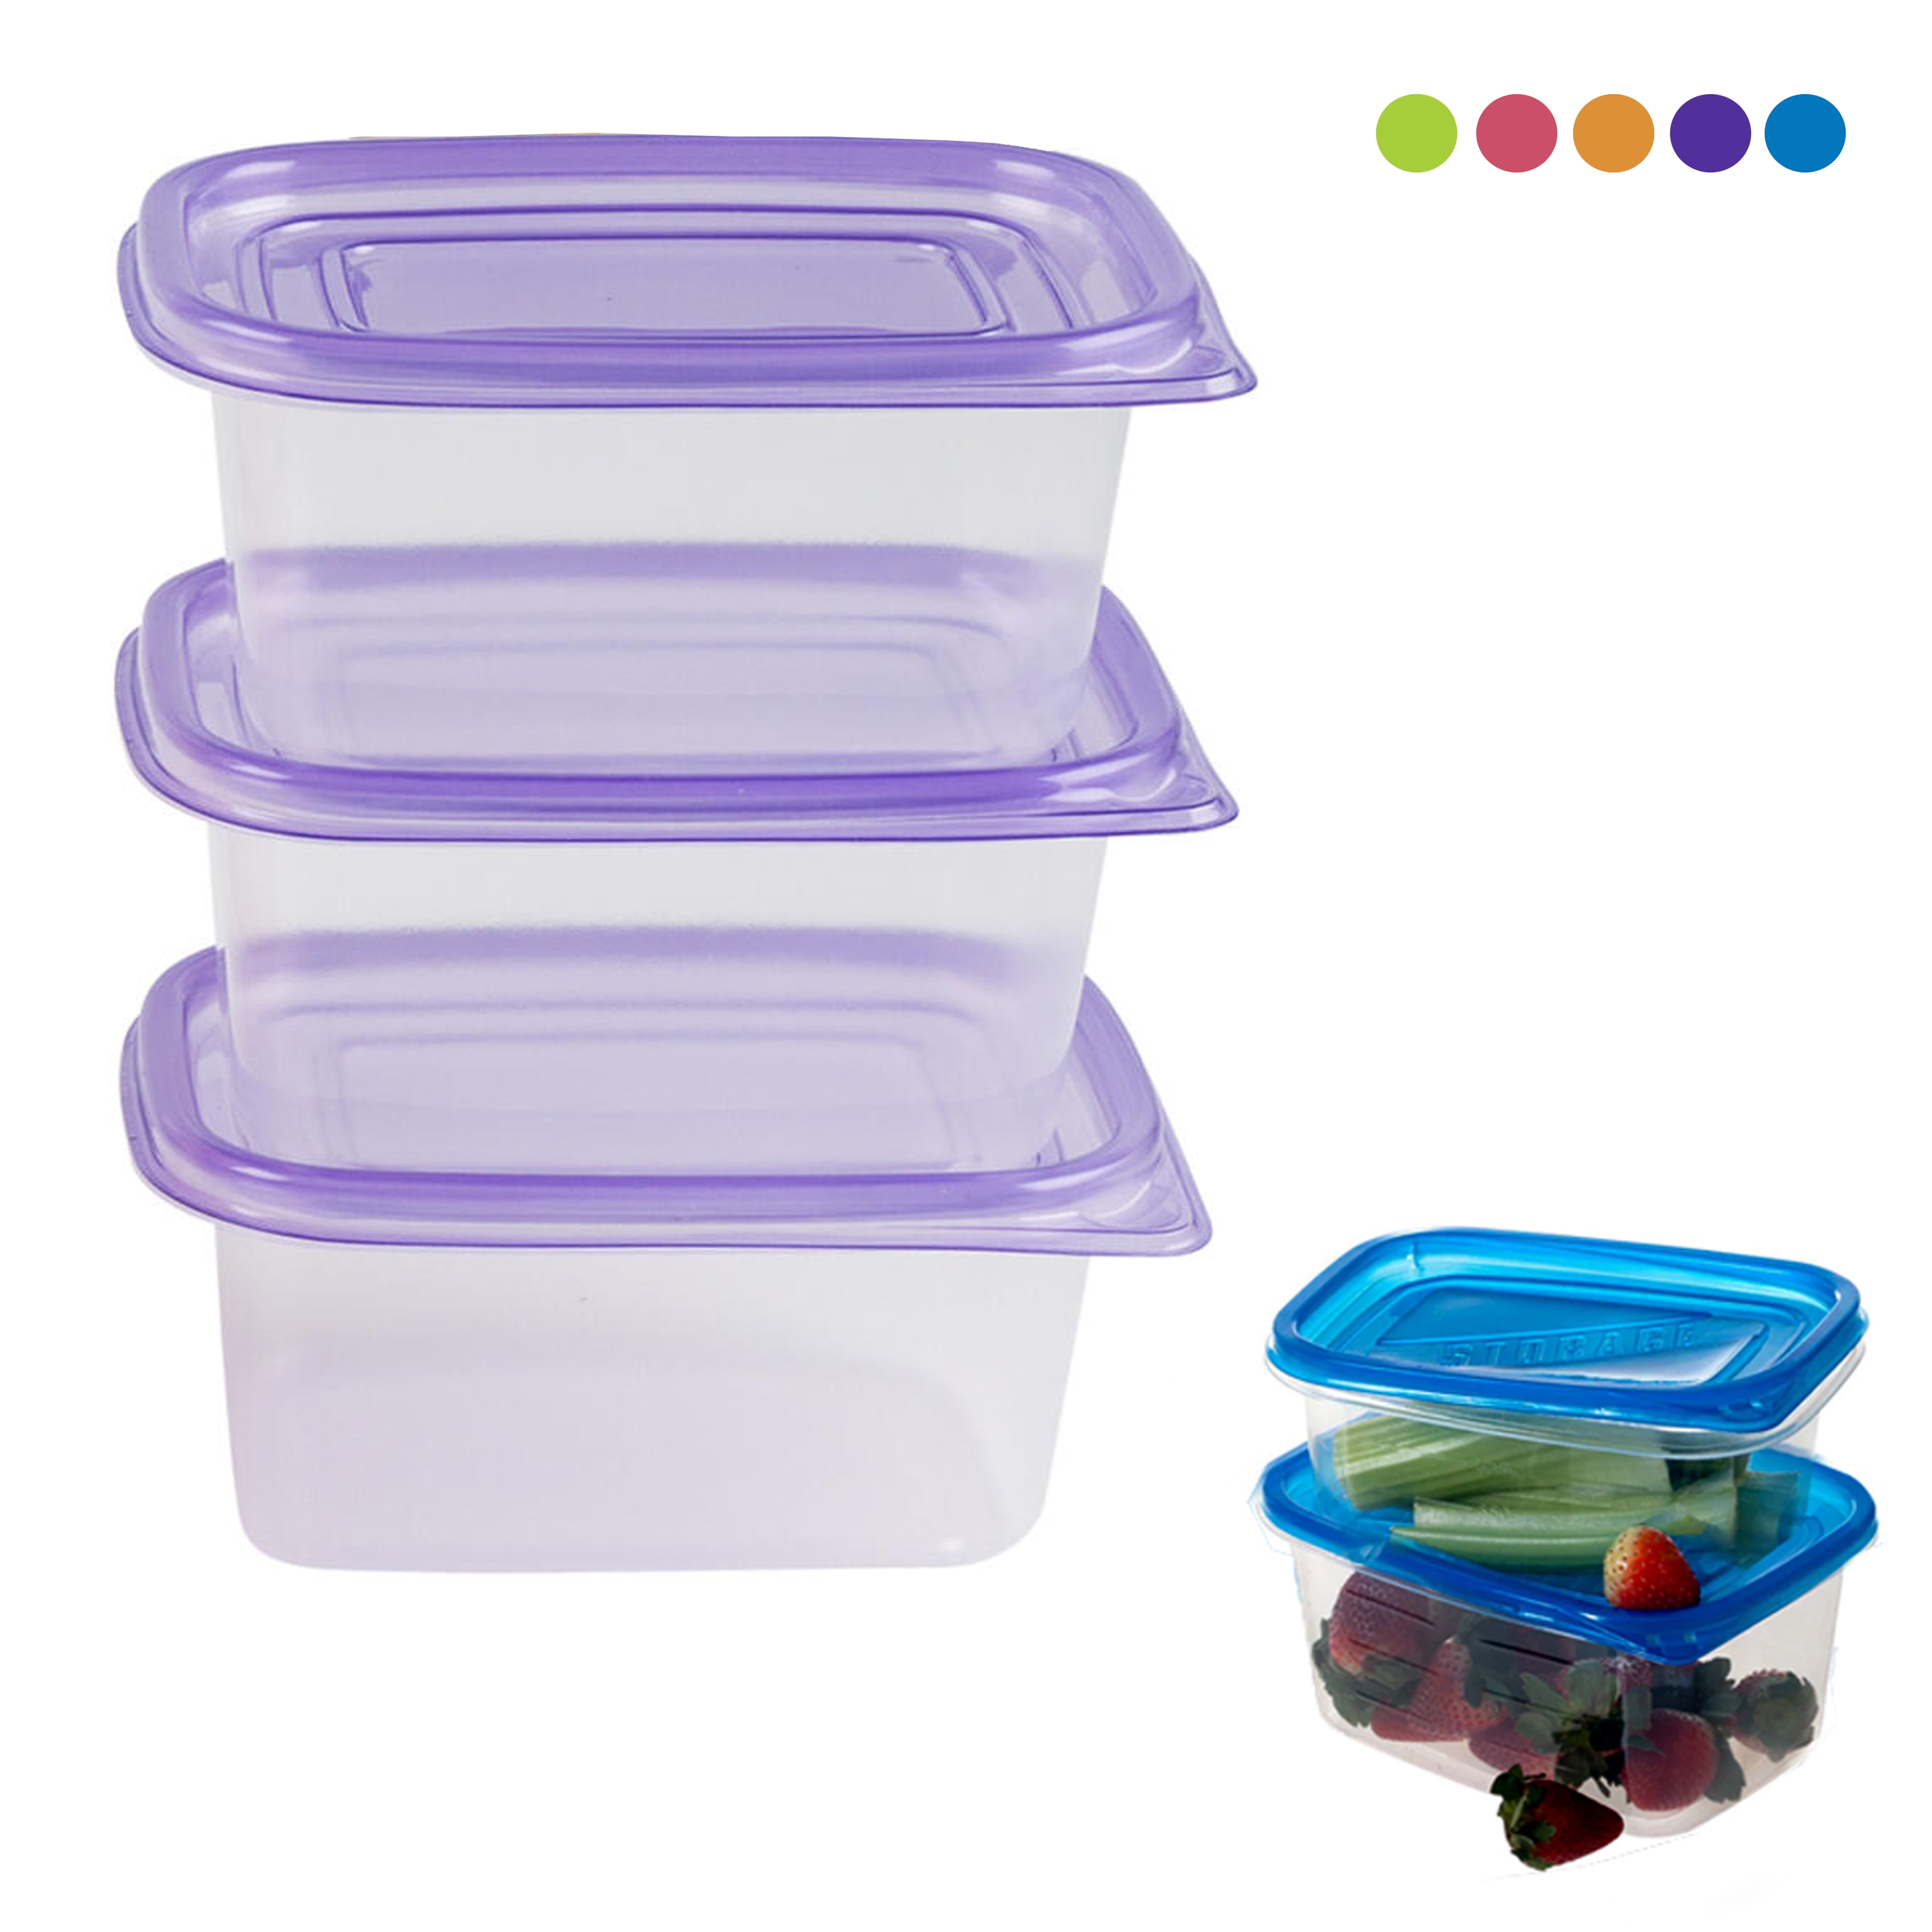 Casa Origin 2-Piece BPA Free Microwave safe Food Containers with lids Square 